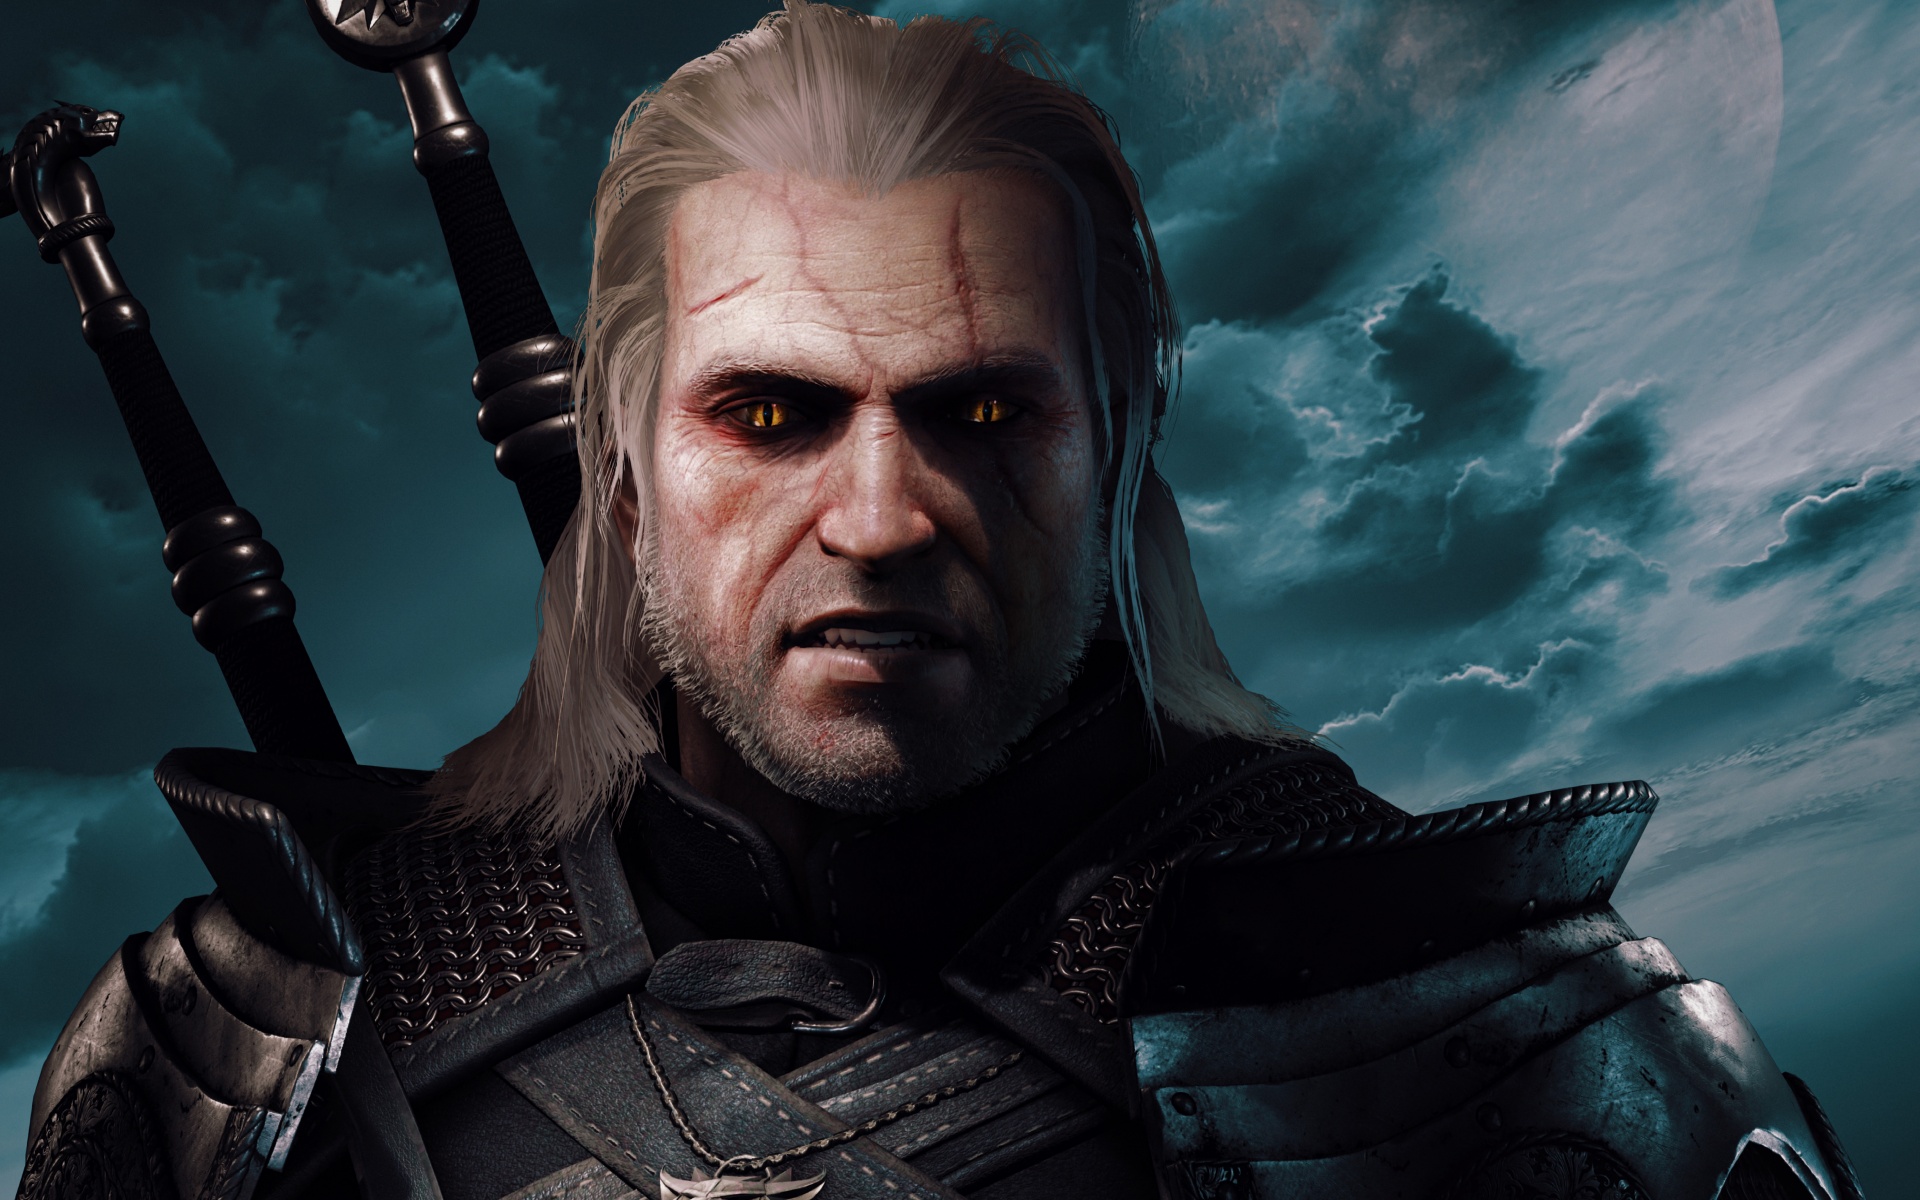 The Witcher 4K HD Wallpapers | HD Wallpapers | ID #31300